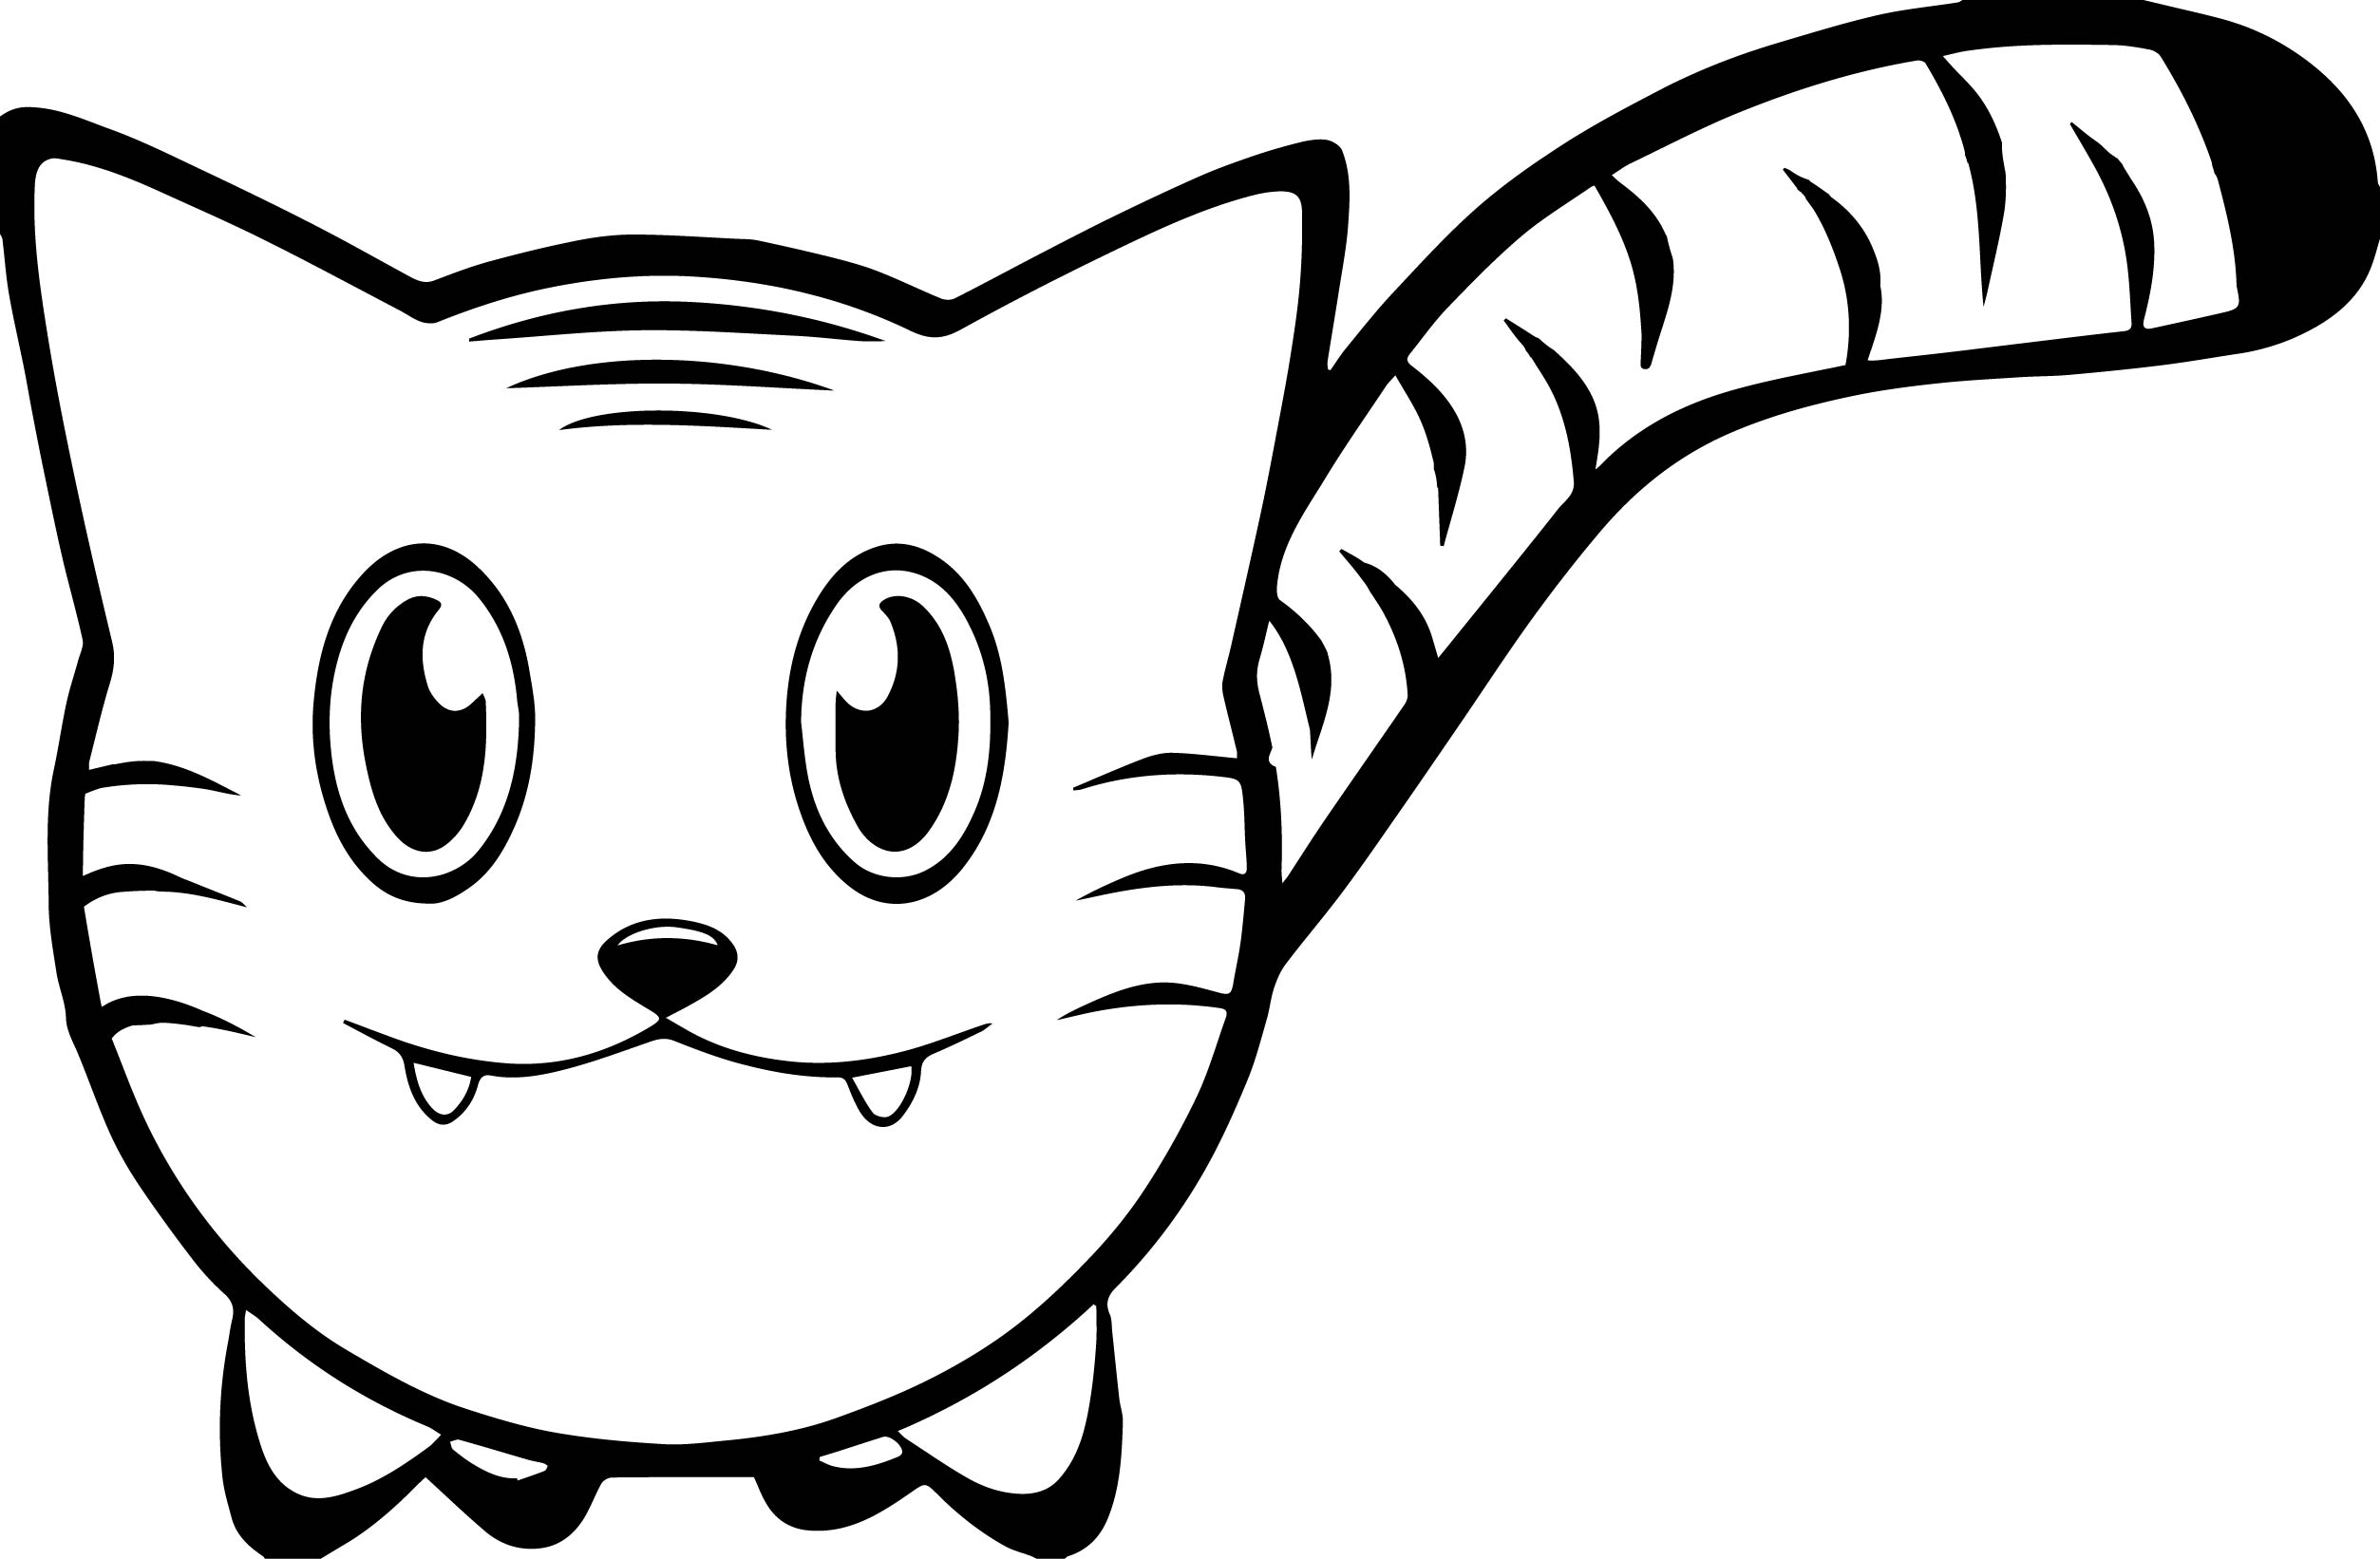 Tiger Face Cat Coloring Page | Wecoloringpage